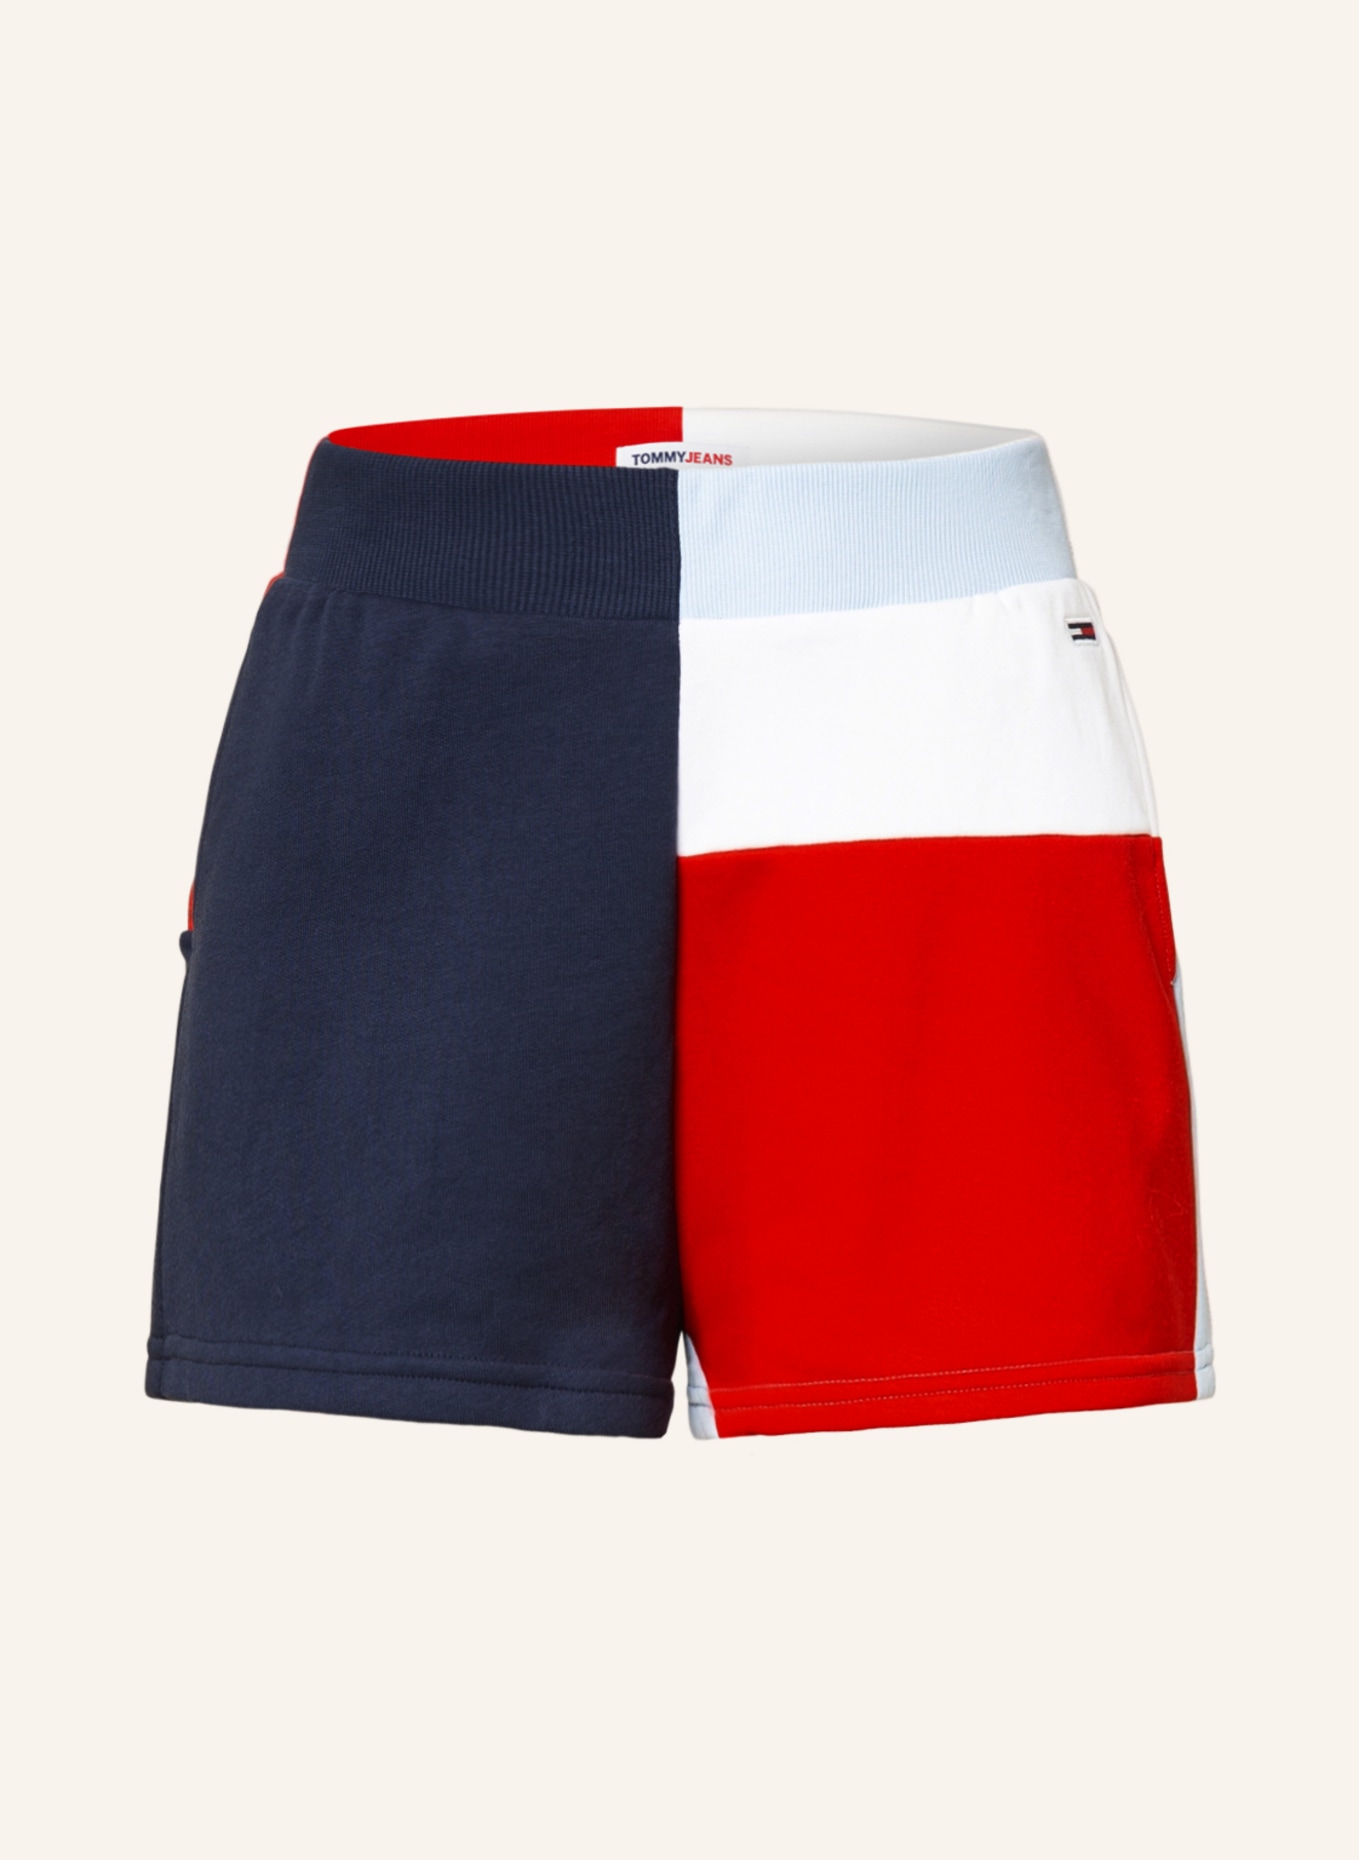 TOMMY JEANS Sweat shorts, Color: DARK BLUE/ RED/ LIGHT BLUE (Image 1)